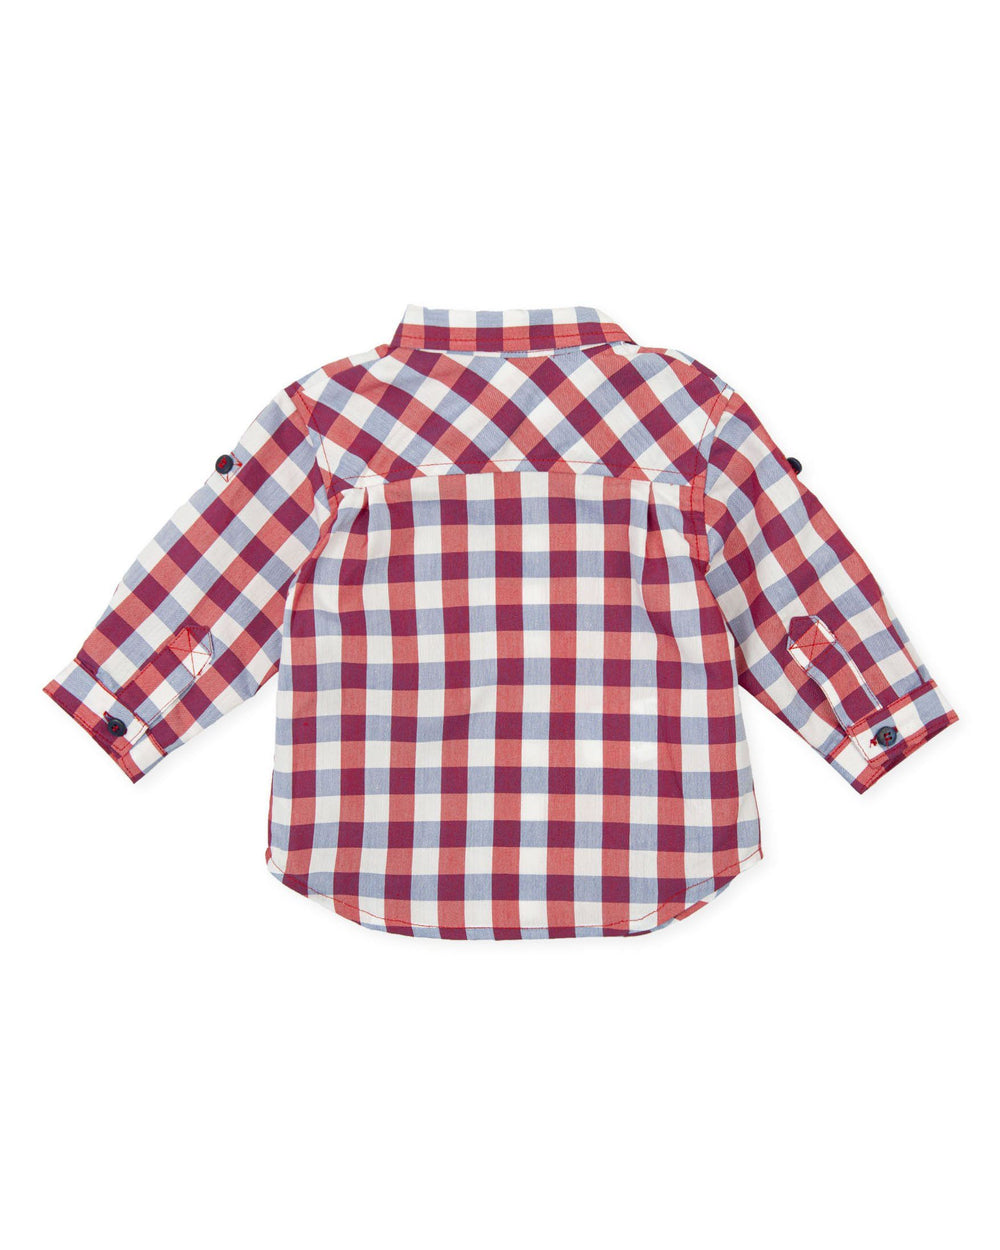 Tutto Piccolo "Laiken" Red & Navy Check Shirt & Shorts | Millie and John